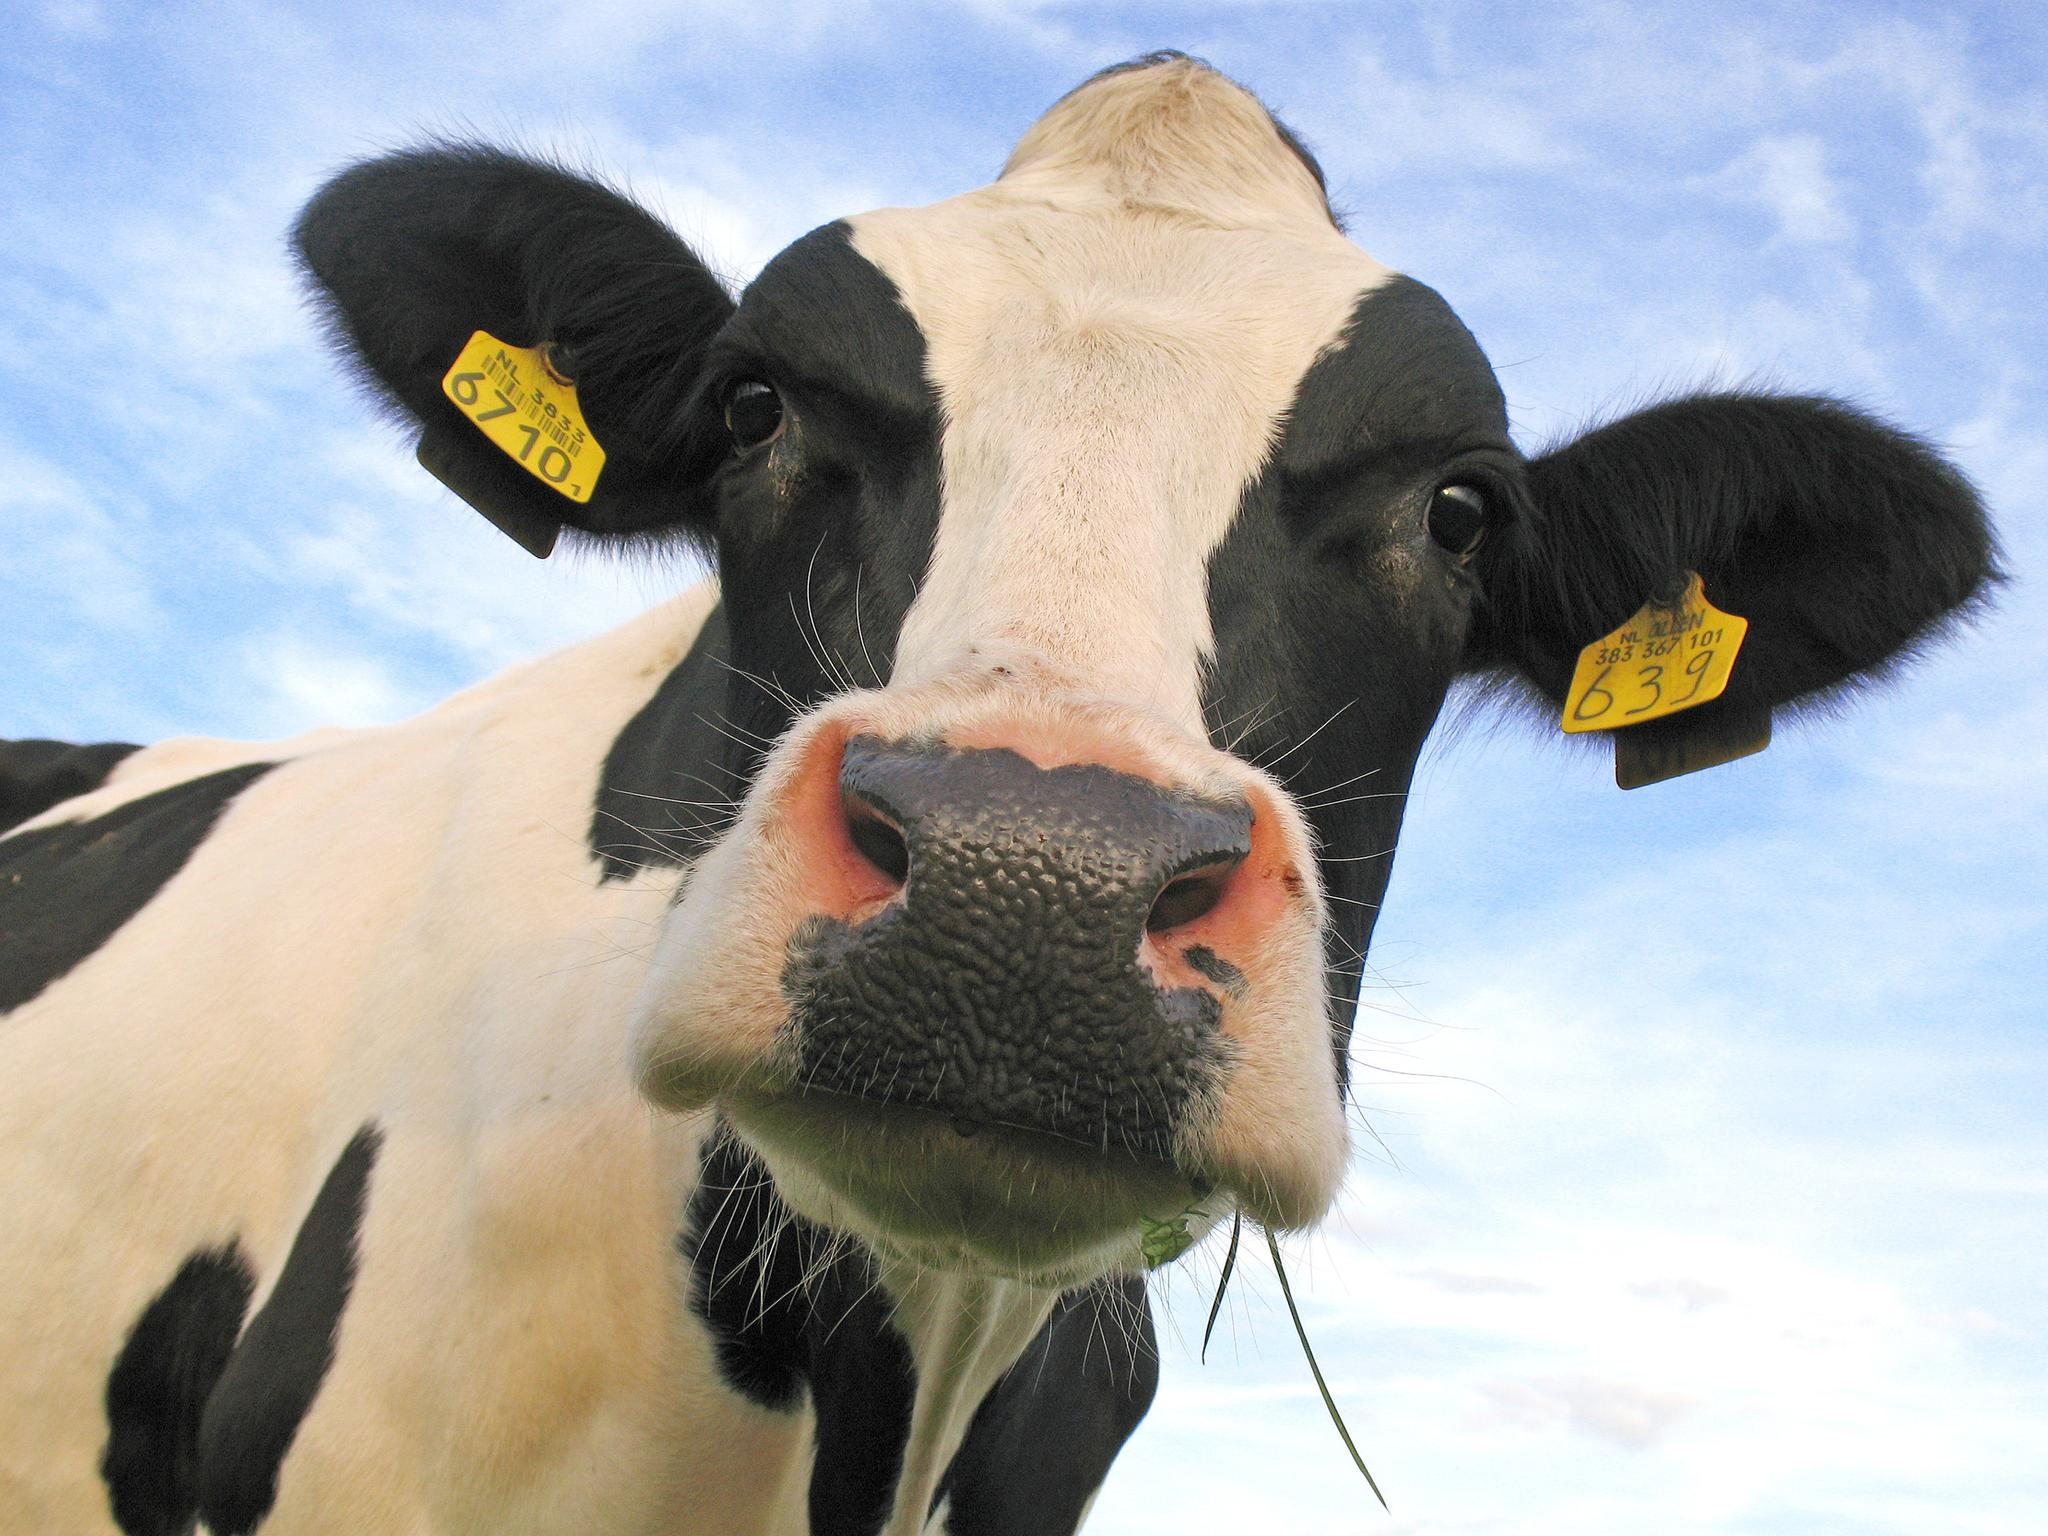 10 Reasons To Love Cows